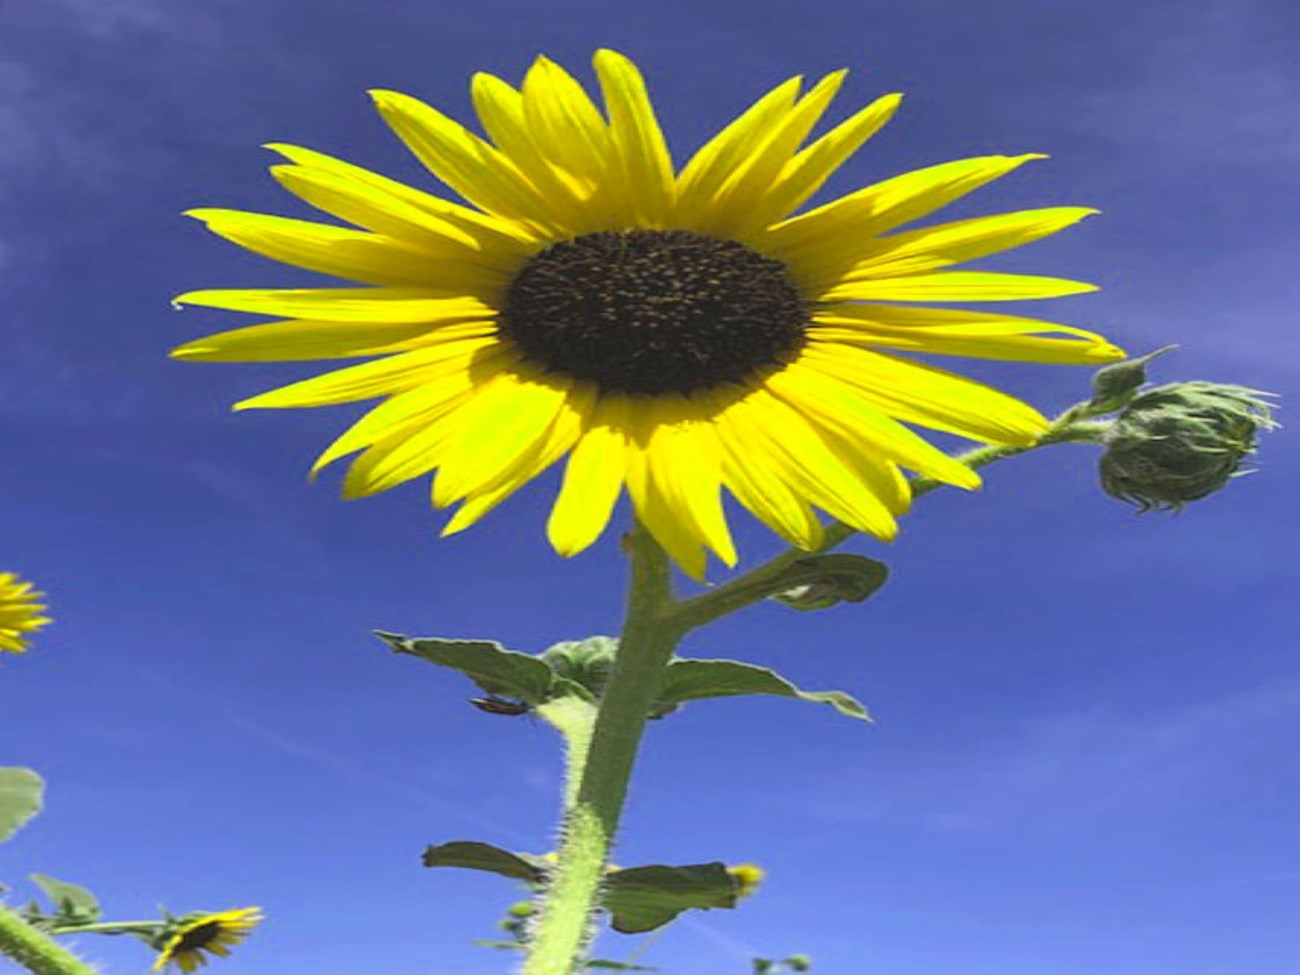 A yellow Common Sunflower with a brown center.